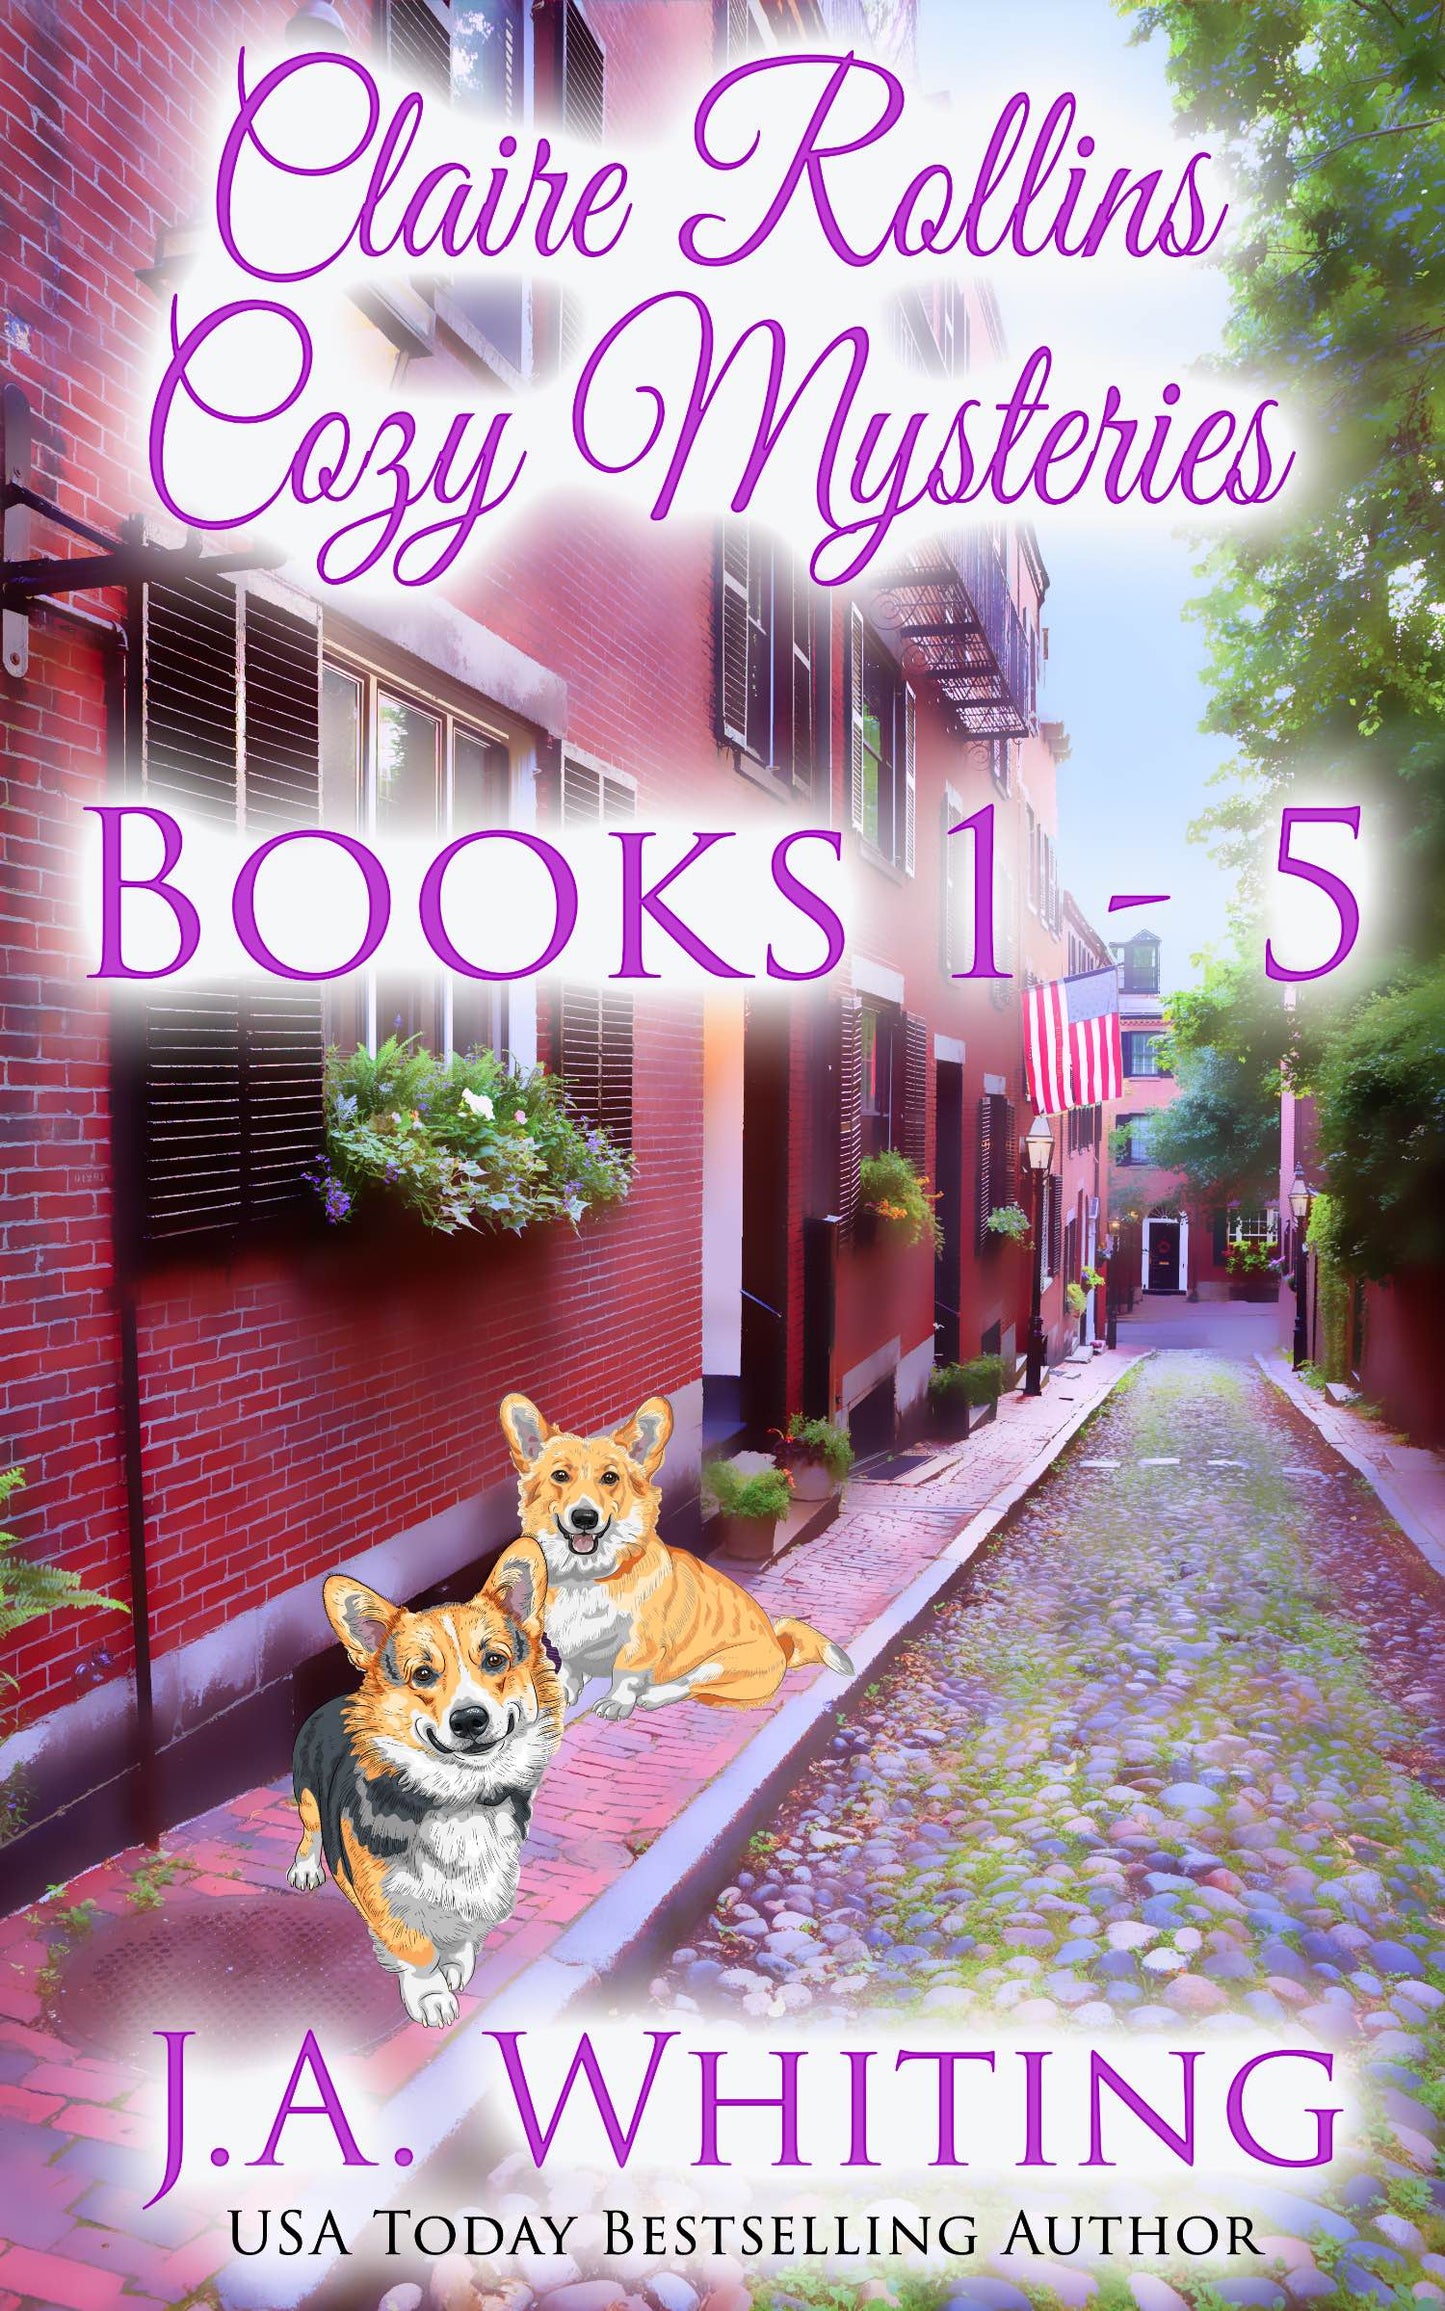 Claire Rollins Cozy Mysteries: Books 1-5 (EBOOK)